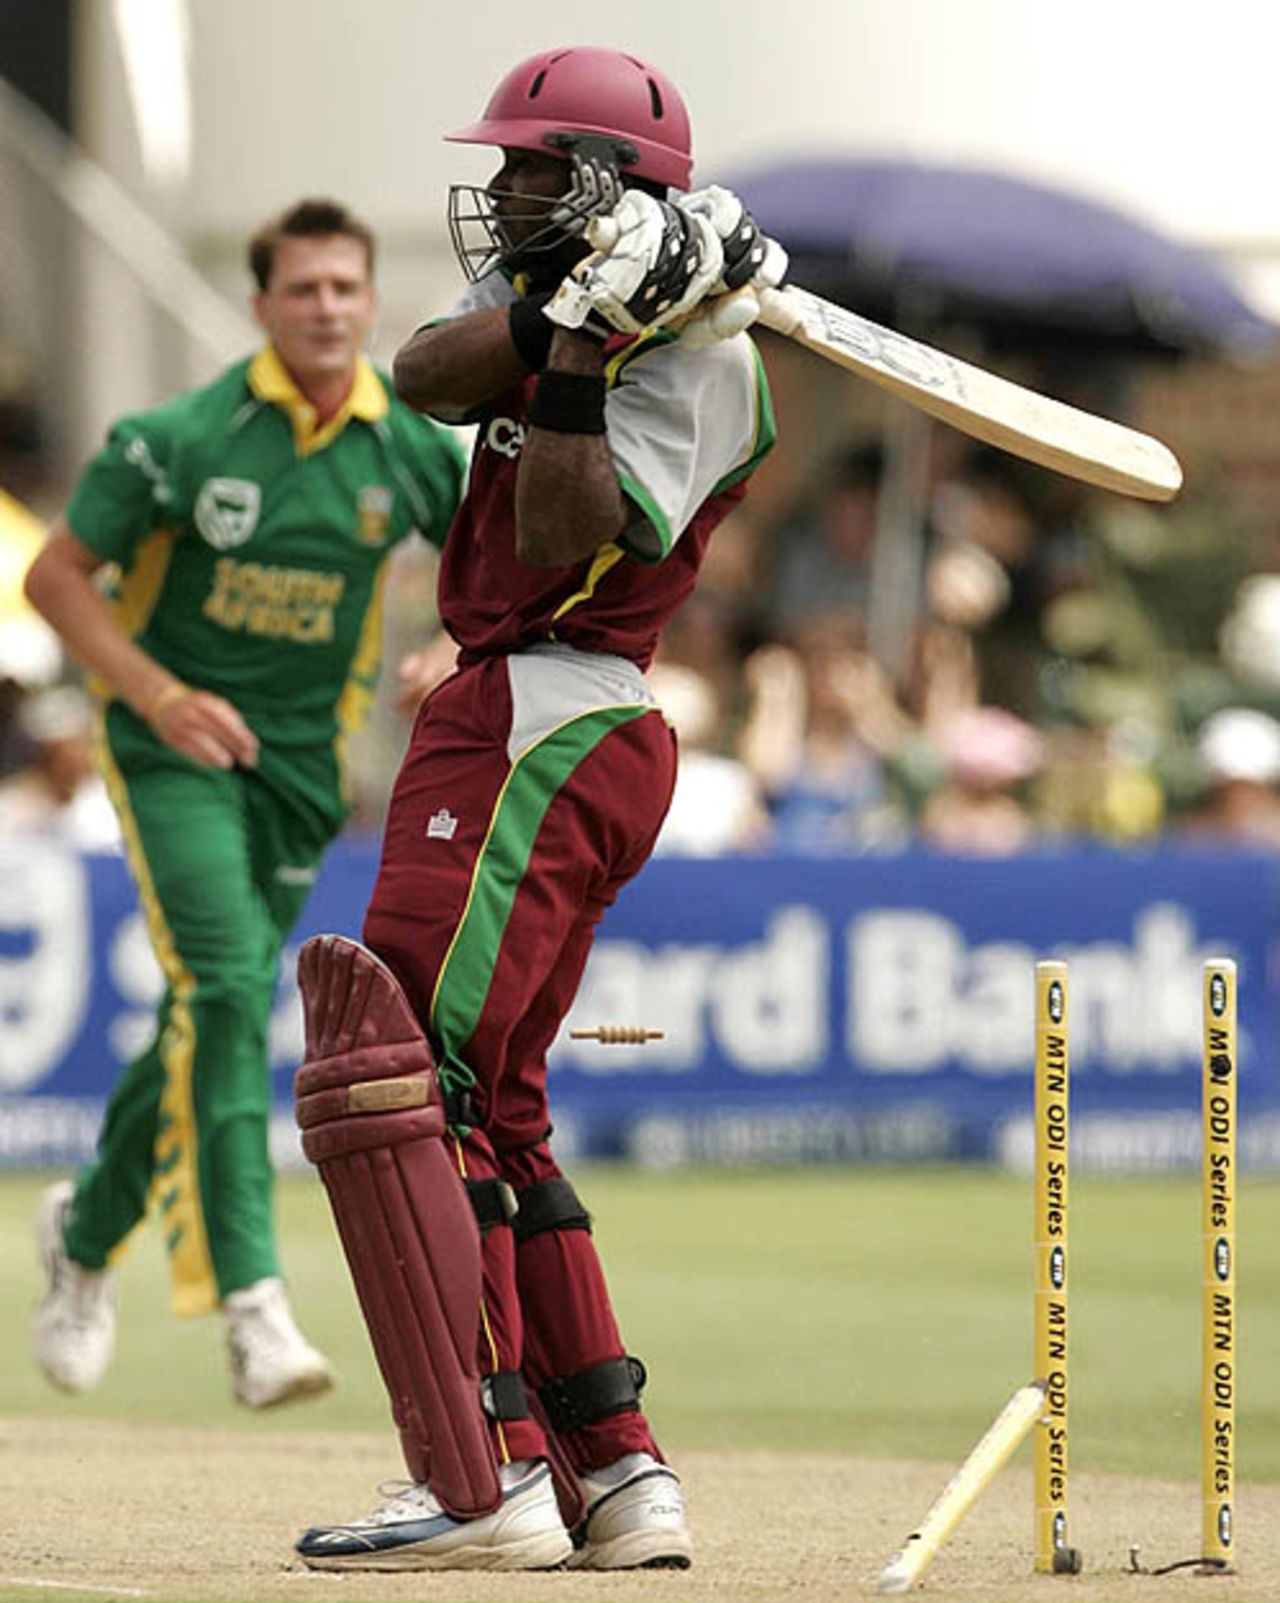 Brenton Parchment is bowled off a free hit, South Africa v West Indies, 3rd ODI, Port Elizabeth, January 27, 2008